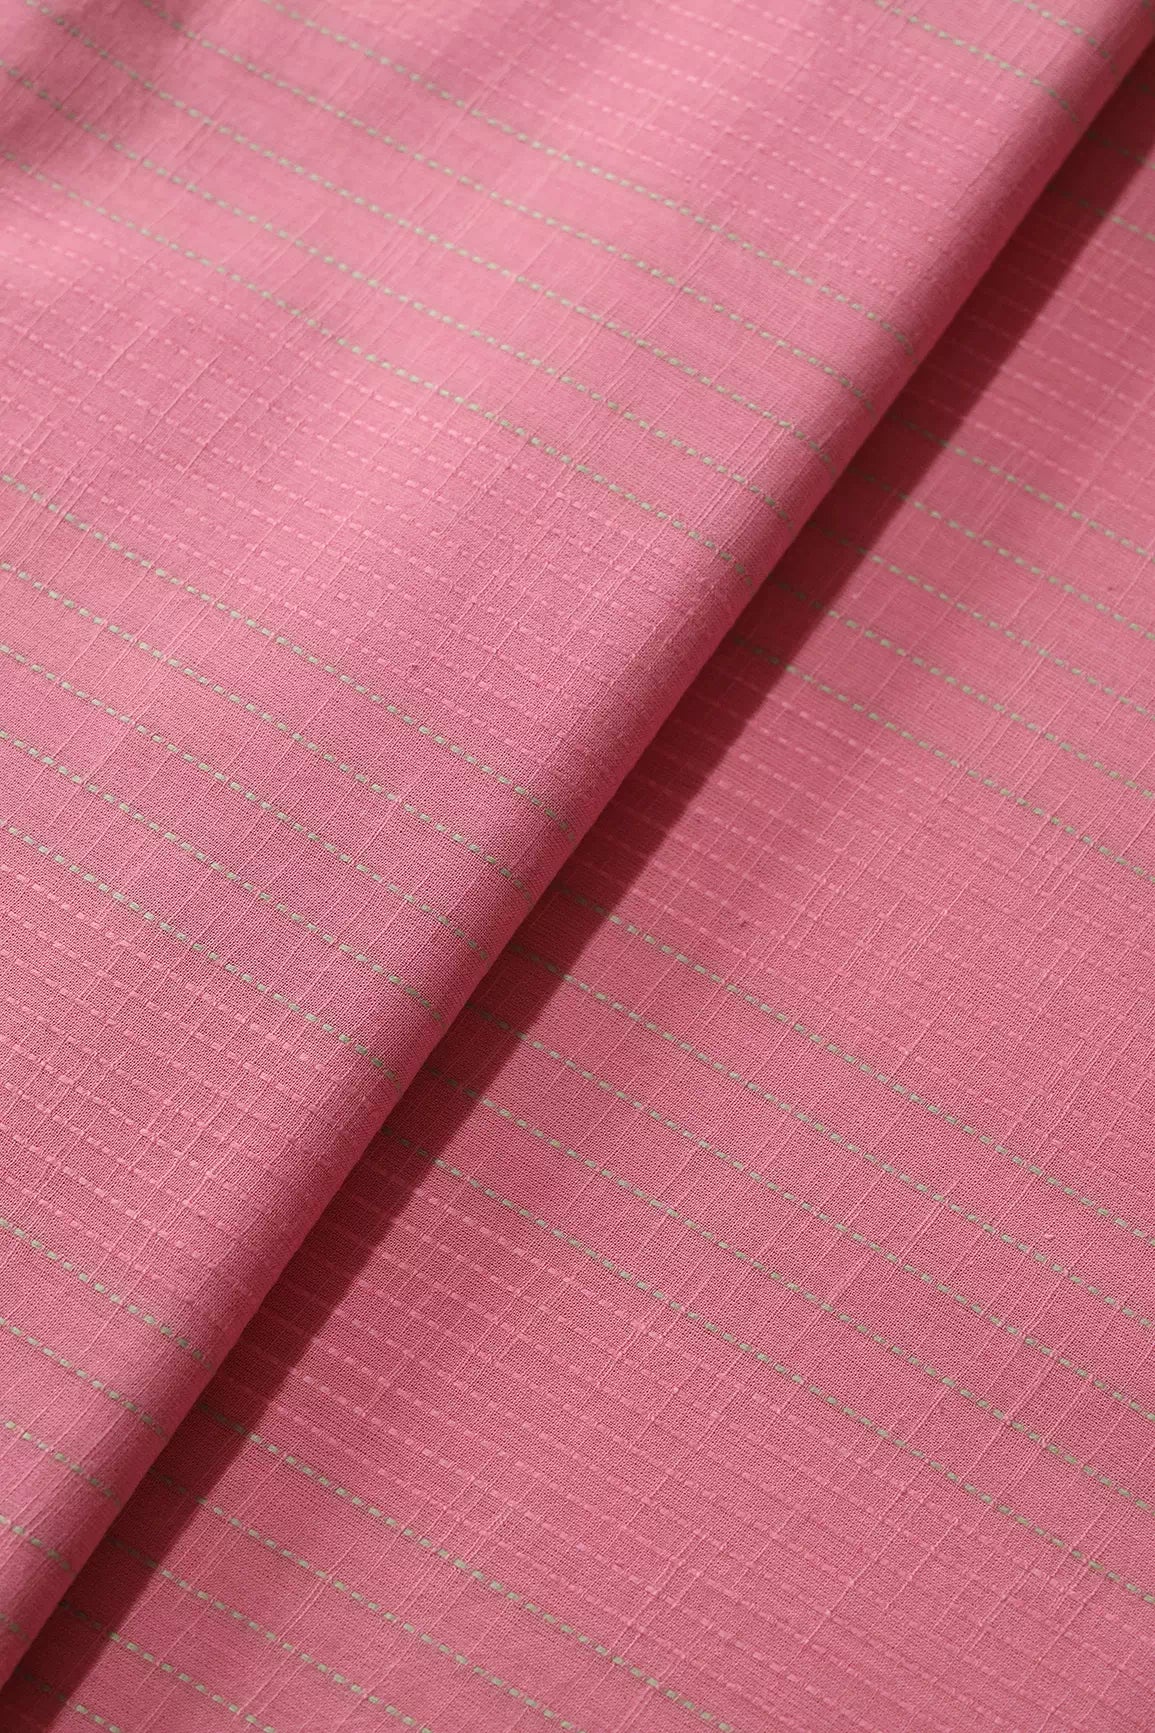 Beige And Pink Stripes Pattern On Handwoven Organic Cotton Fabric